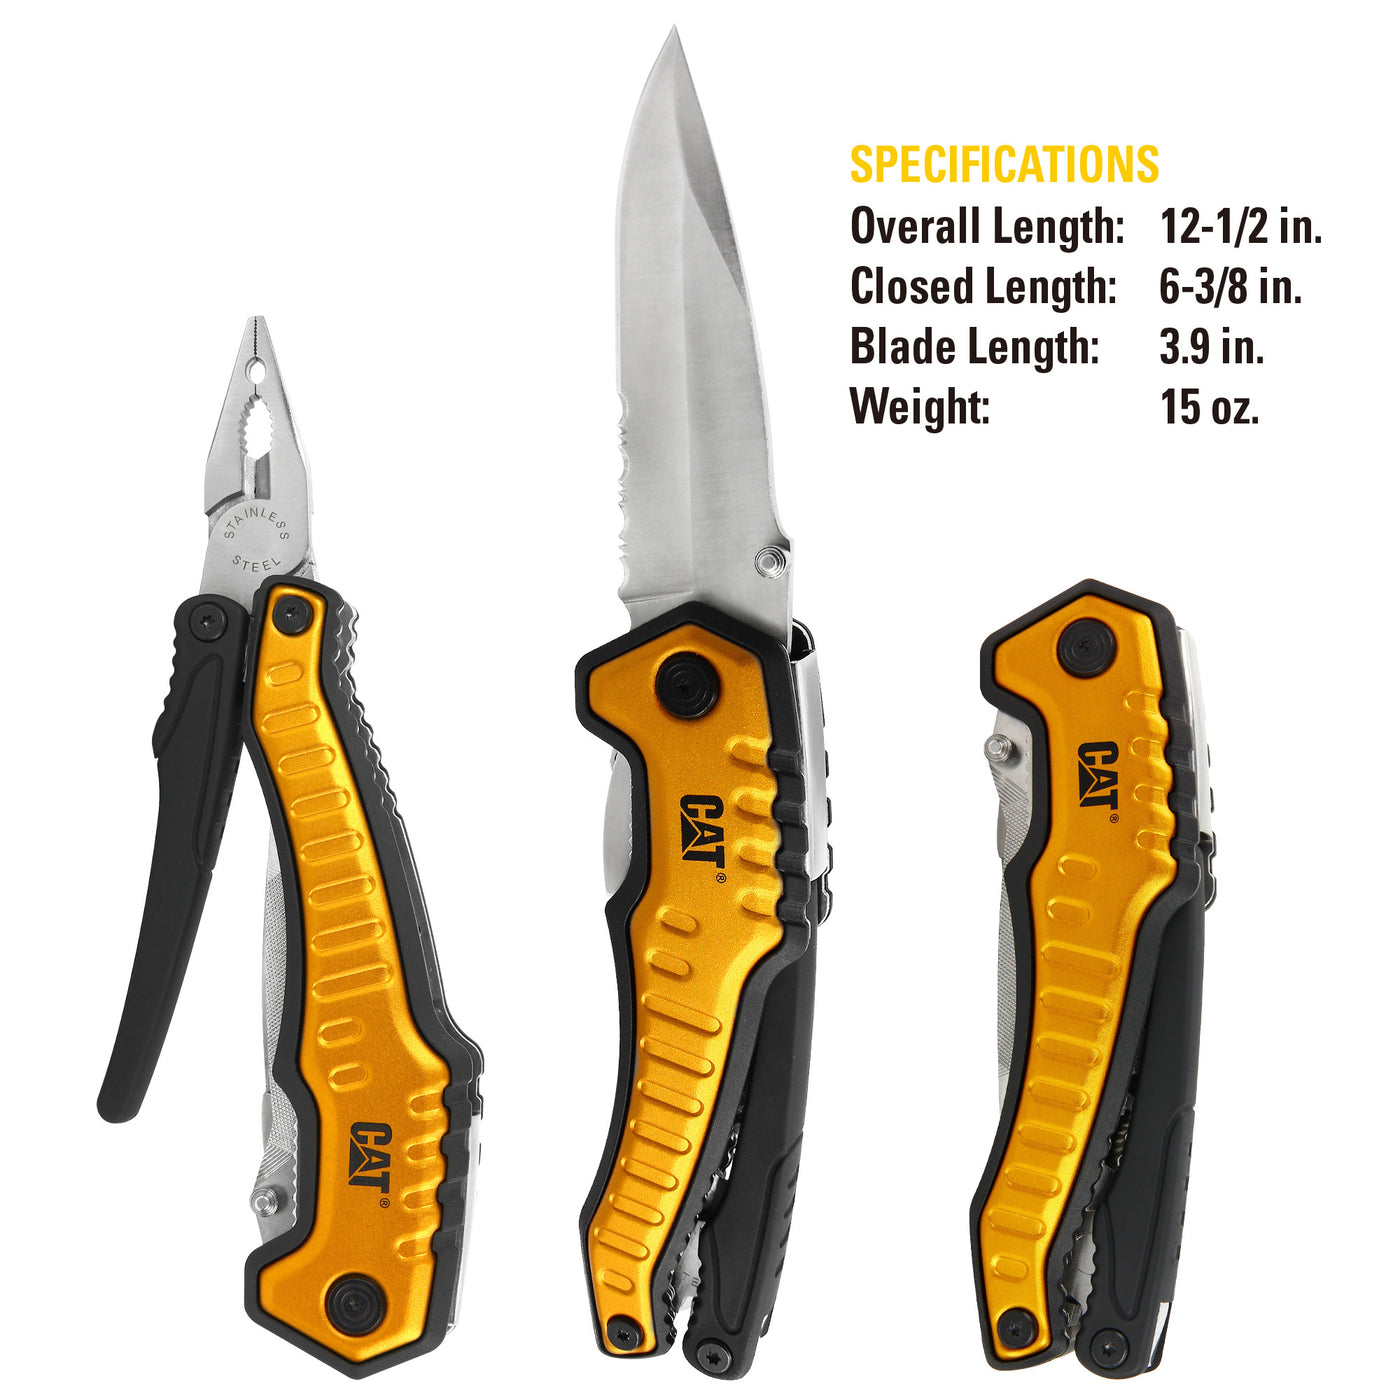 9-in-1 XL Multi Tool with Full Size Knife Blade and Pliers